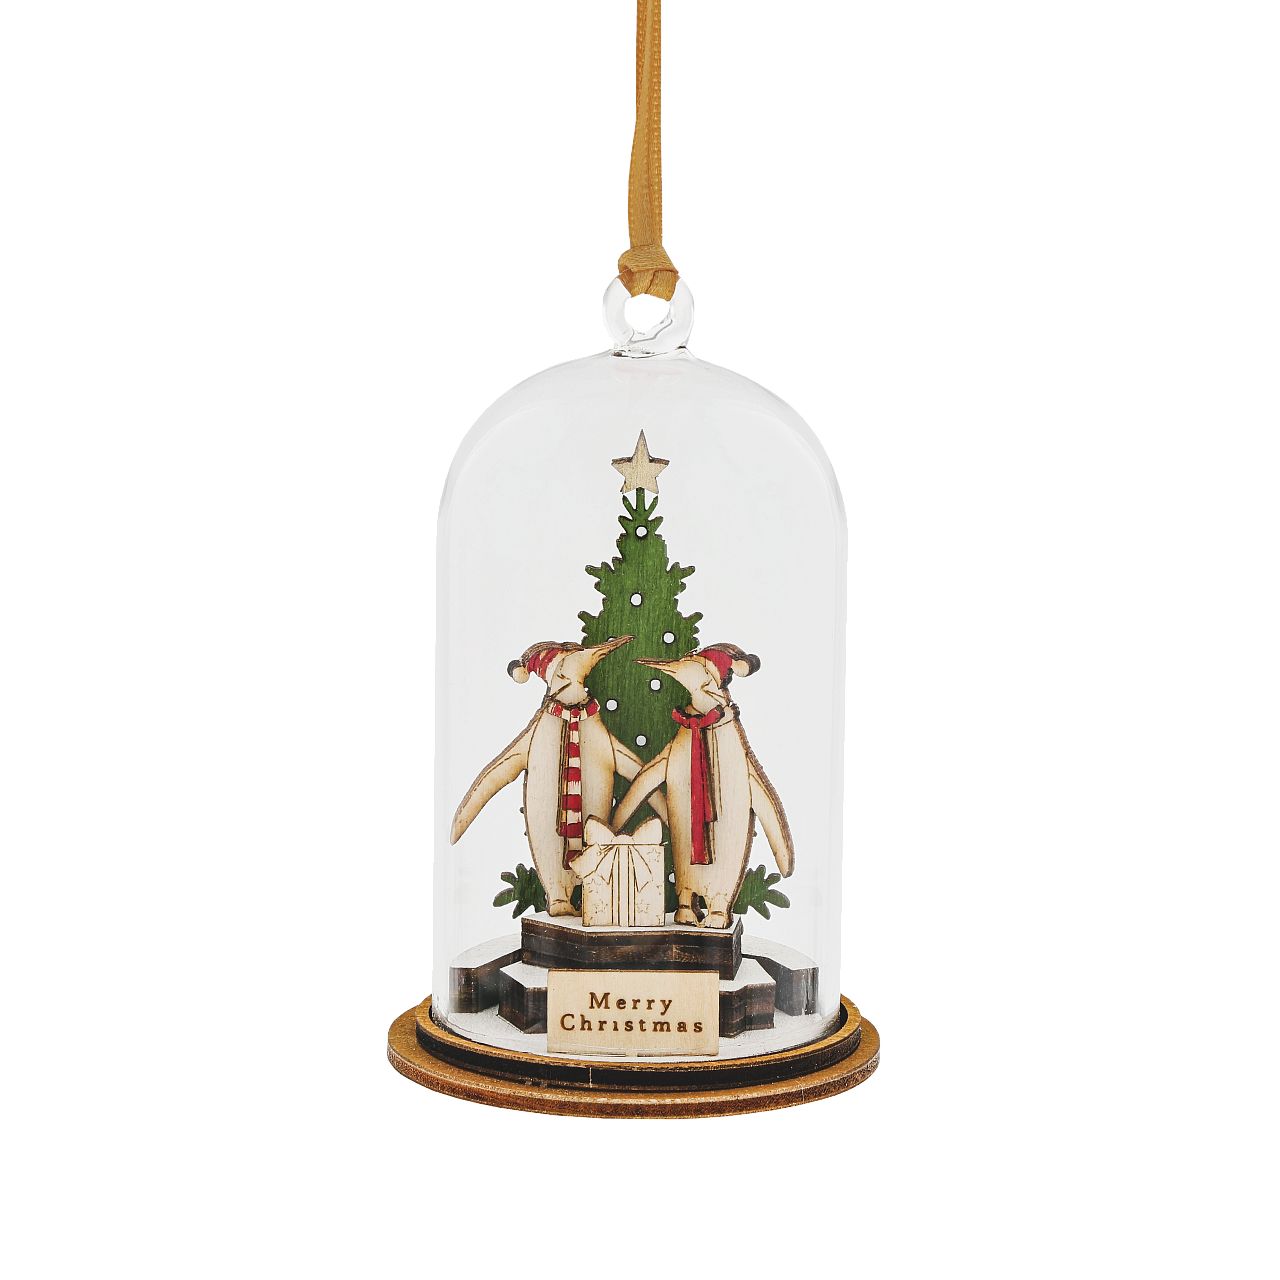 Kloche Merry Christmas Hanging Ornament  The Spirit of Christmas, a collection of delightful wooden decorations that capture the essence of that special time of the year. This glass dome, Christmas decoration encases a cute scene of penguins in their natural habitat.